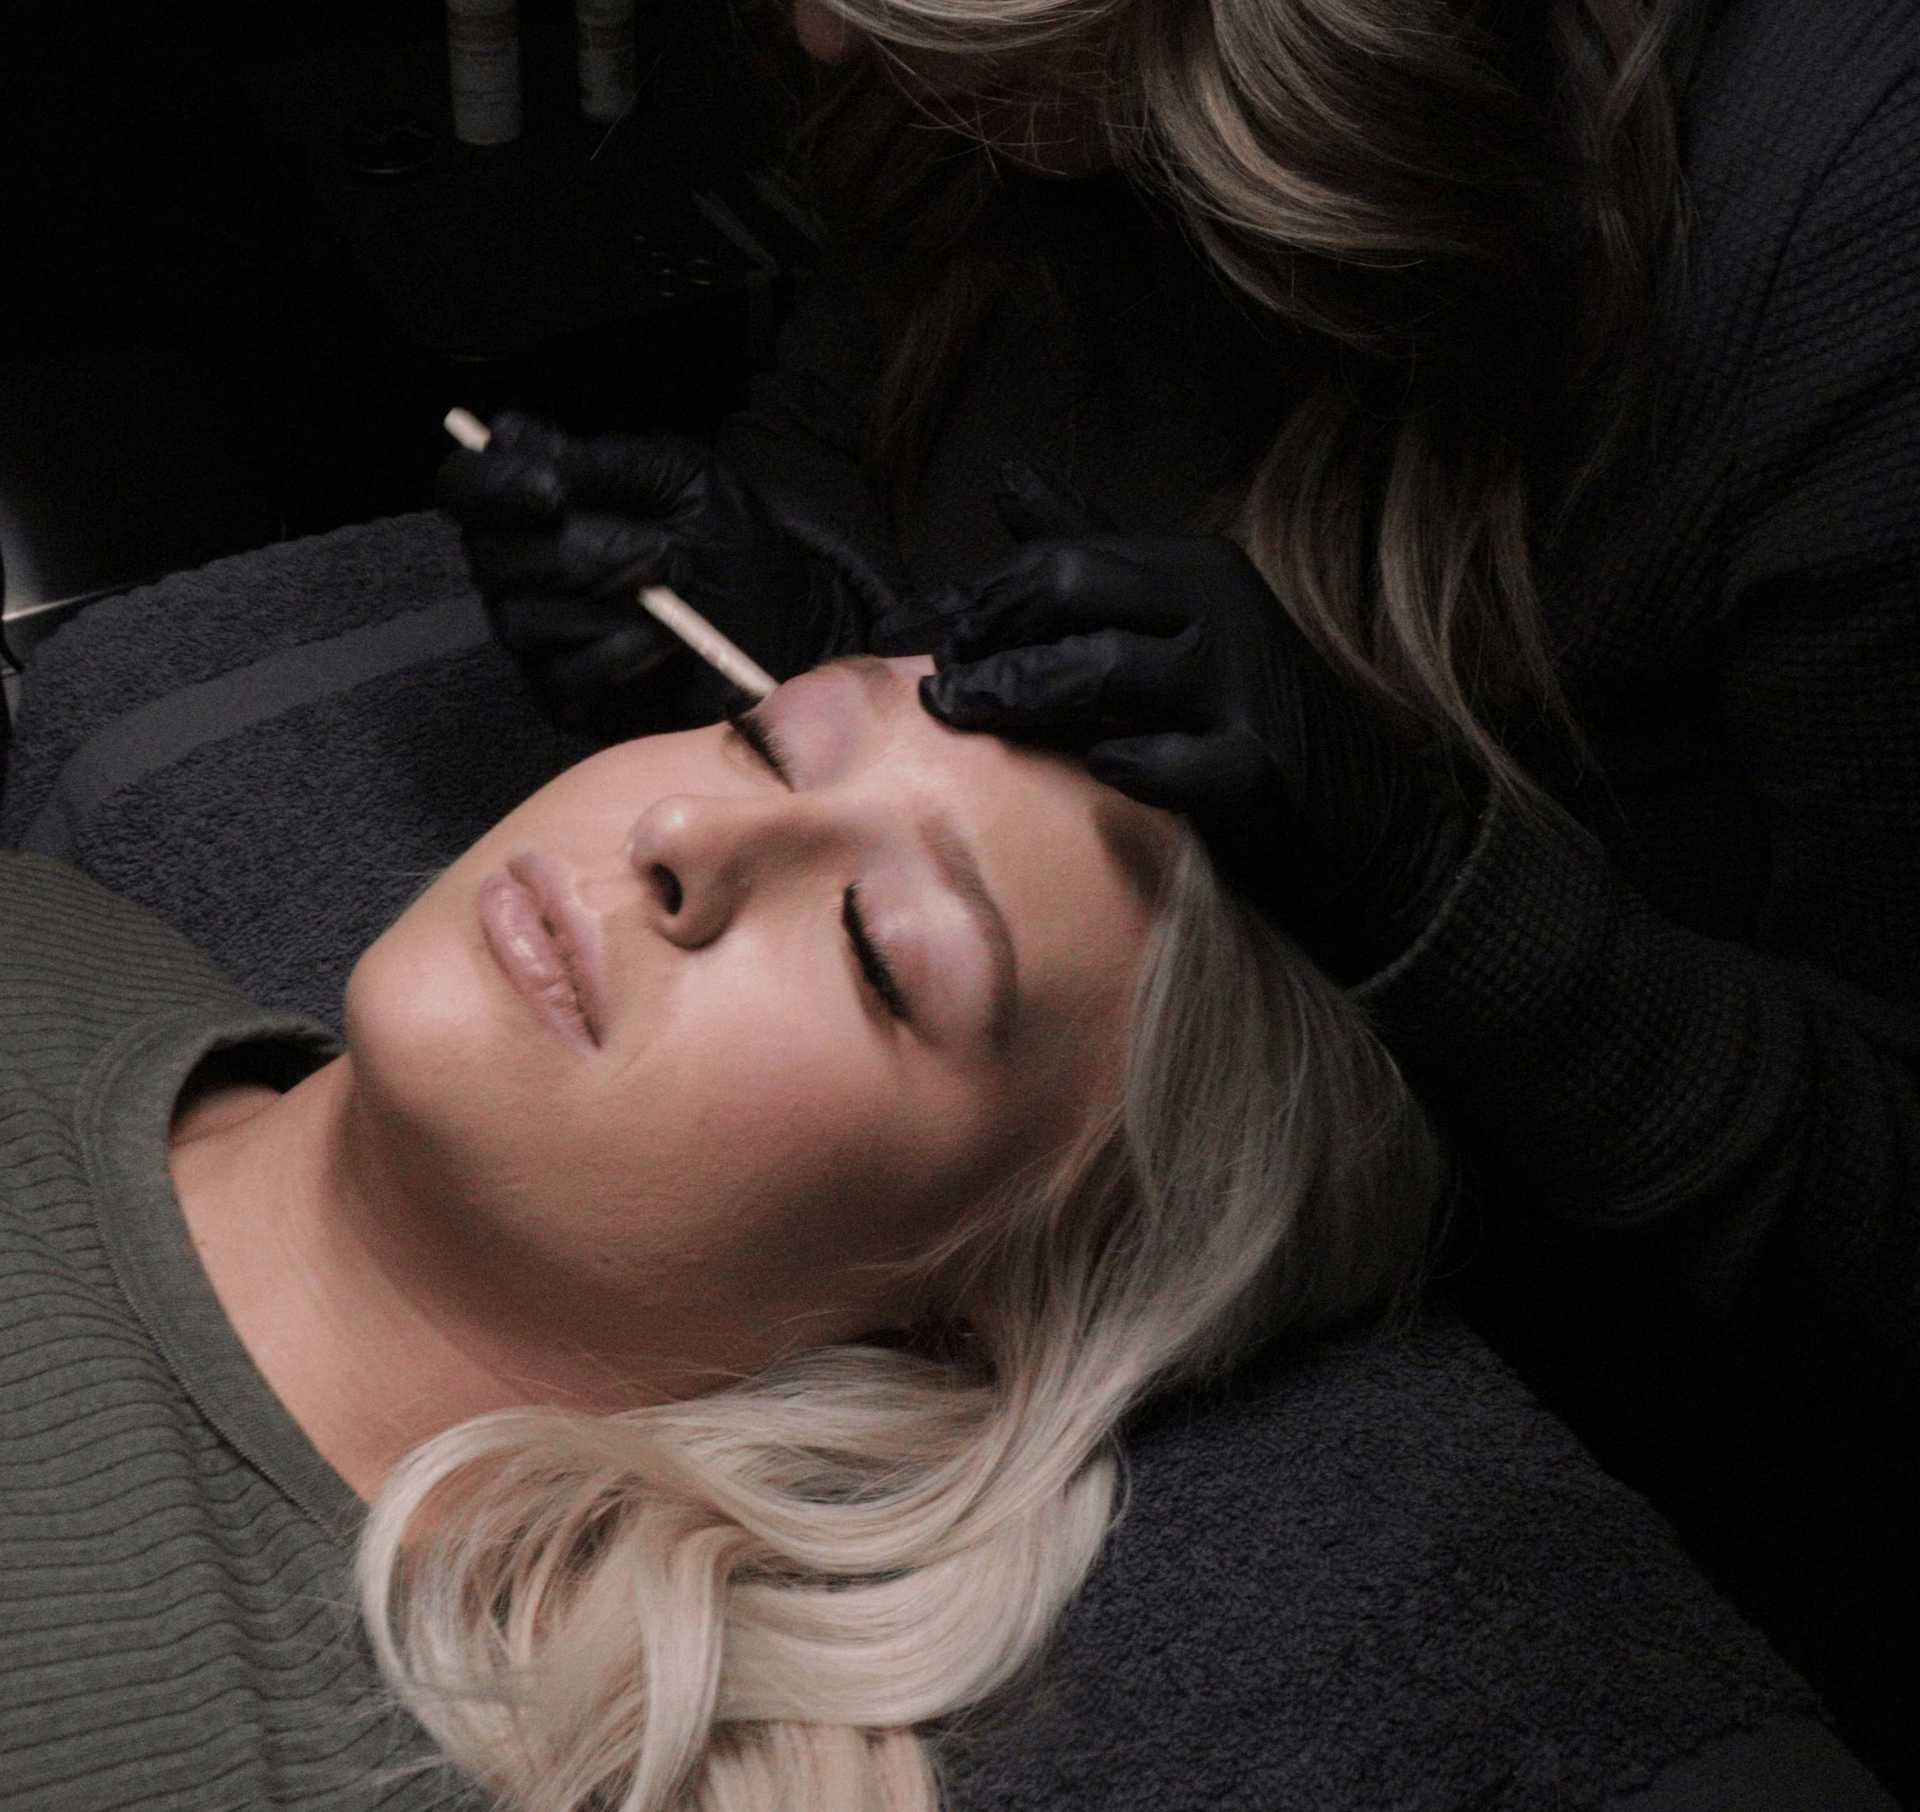 Aesthetician carefully shaping a client's eyebrows during a brow waxing service at Salon Kathleen. The client is reclining with eyes closed as the aesthetician meticulously sculpts and waxes for a polished end result.